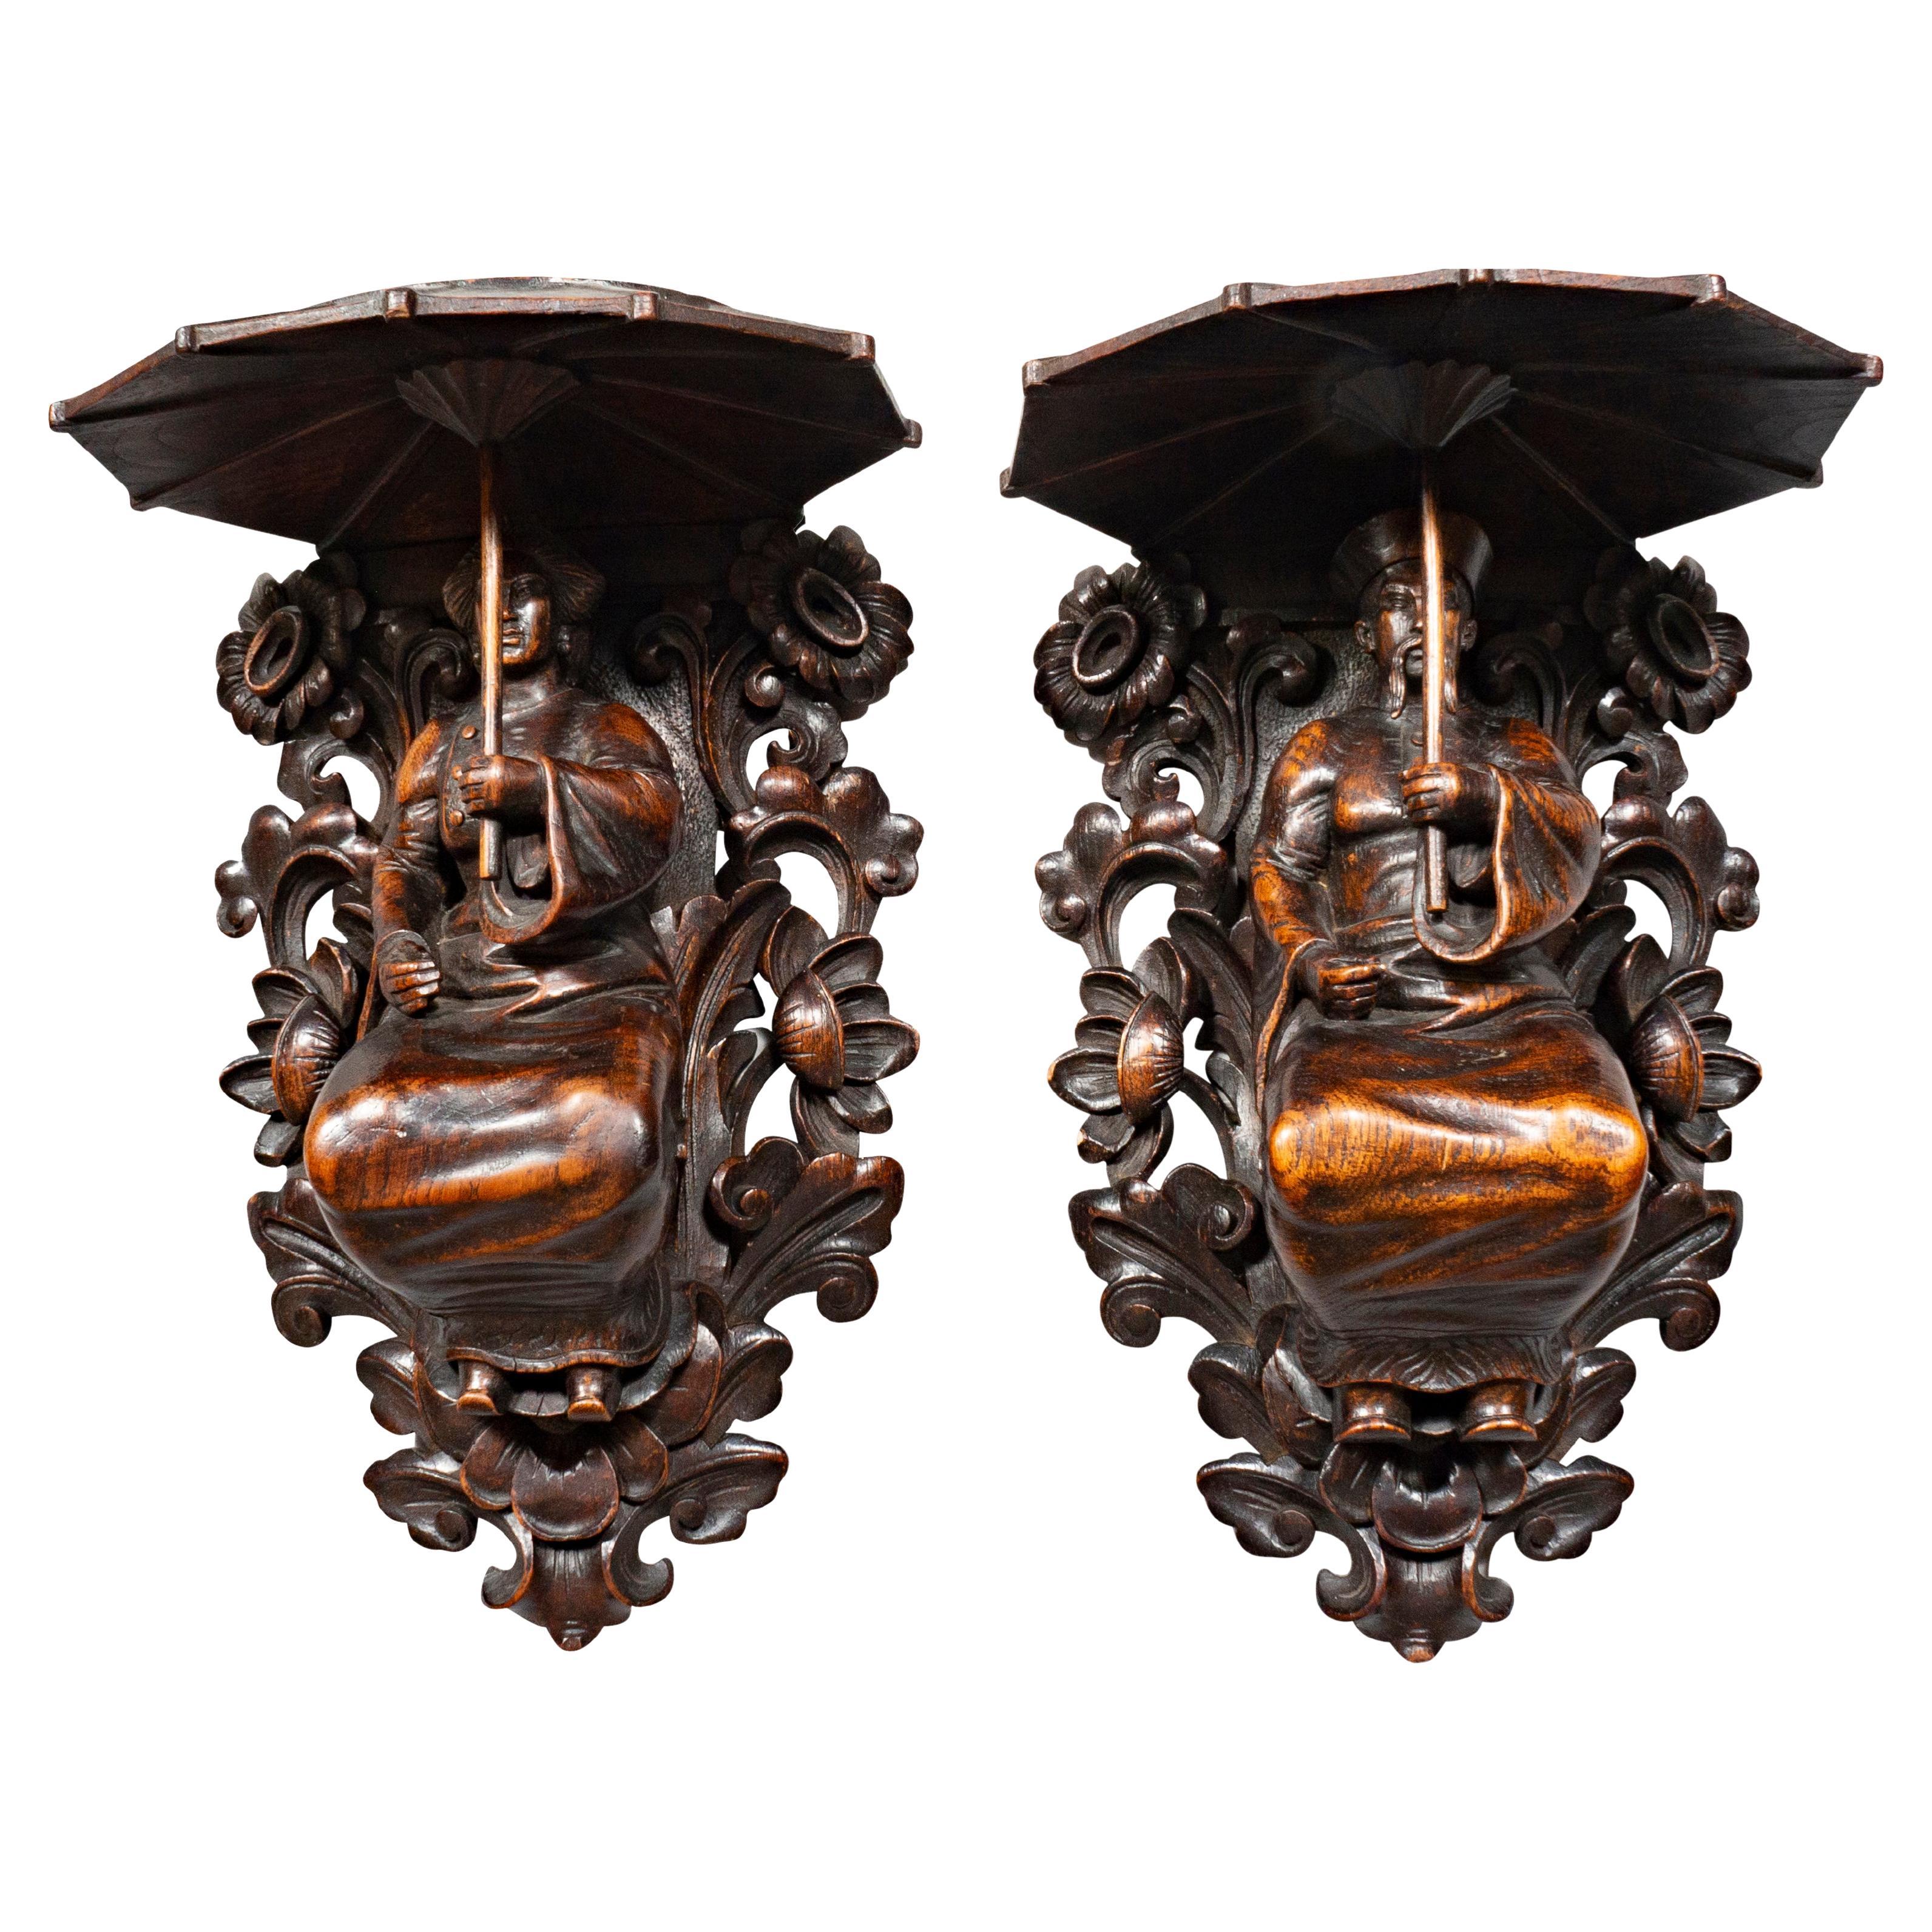 Each nicely carved figures of an Asian man and woman holding parasols with flat tops. Each surrounded by floral and leaf carving.